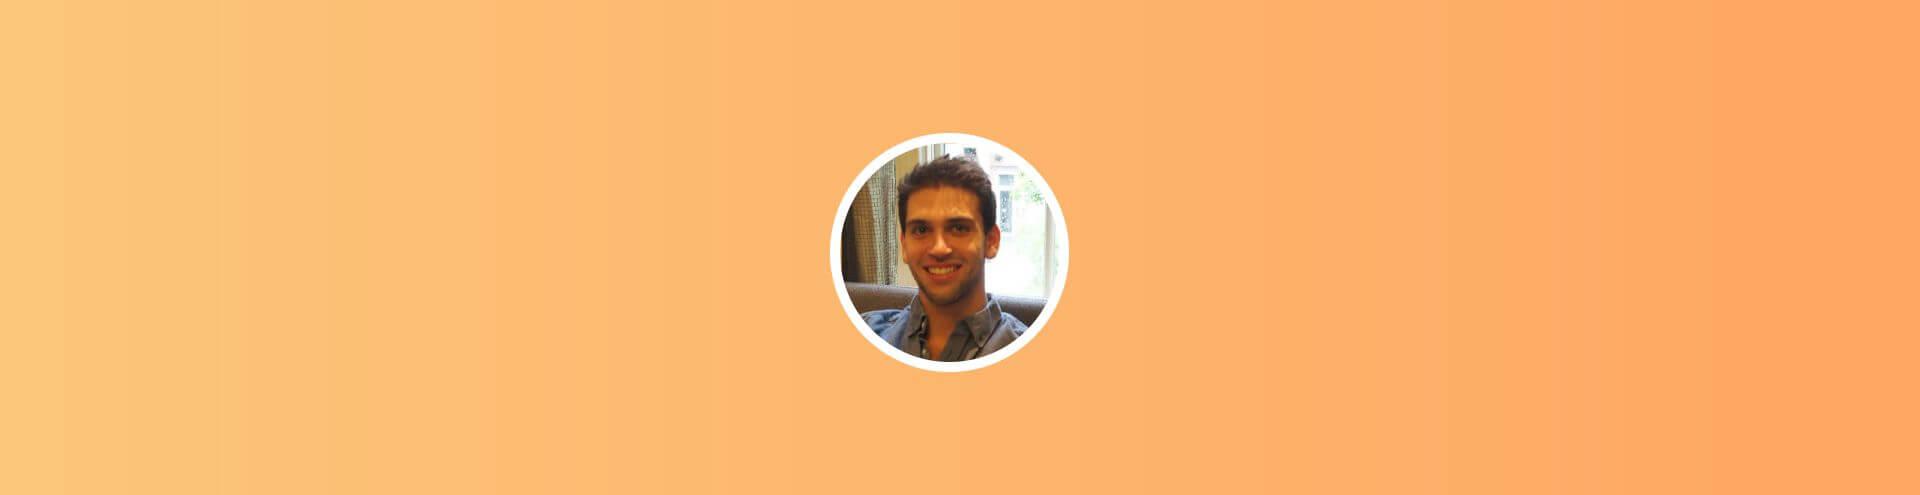 How to Work Effectively With a Dedicated Team: Interview with Eric Typaldos - Co-Founder and CTO at Hive